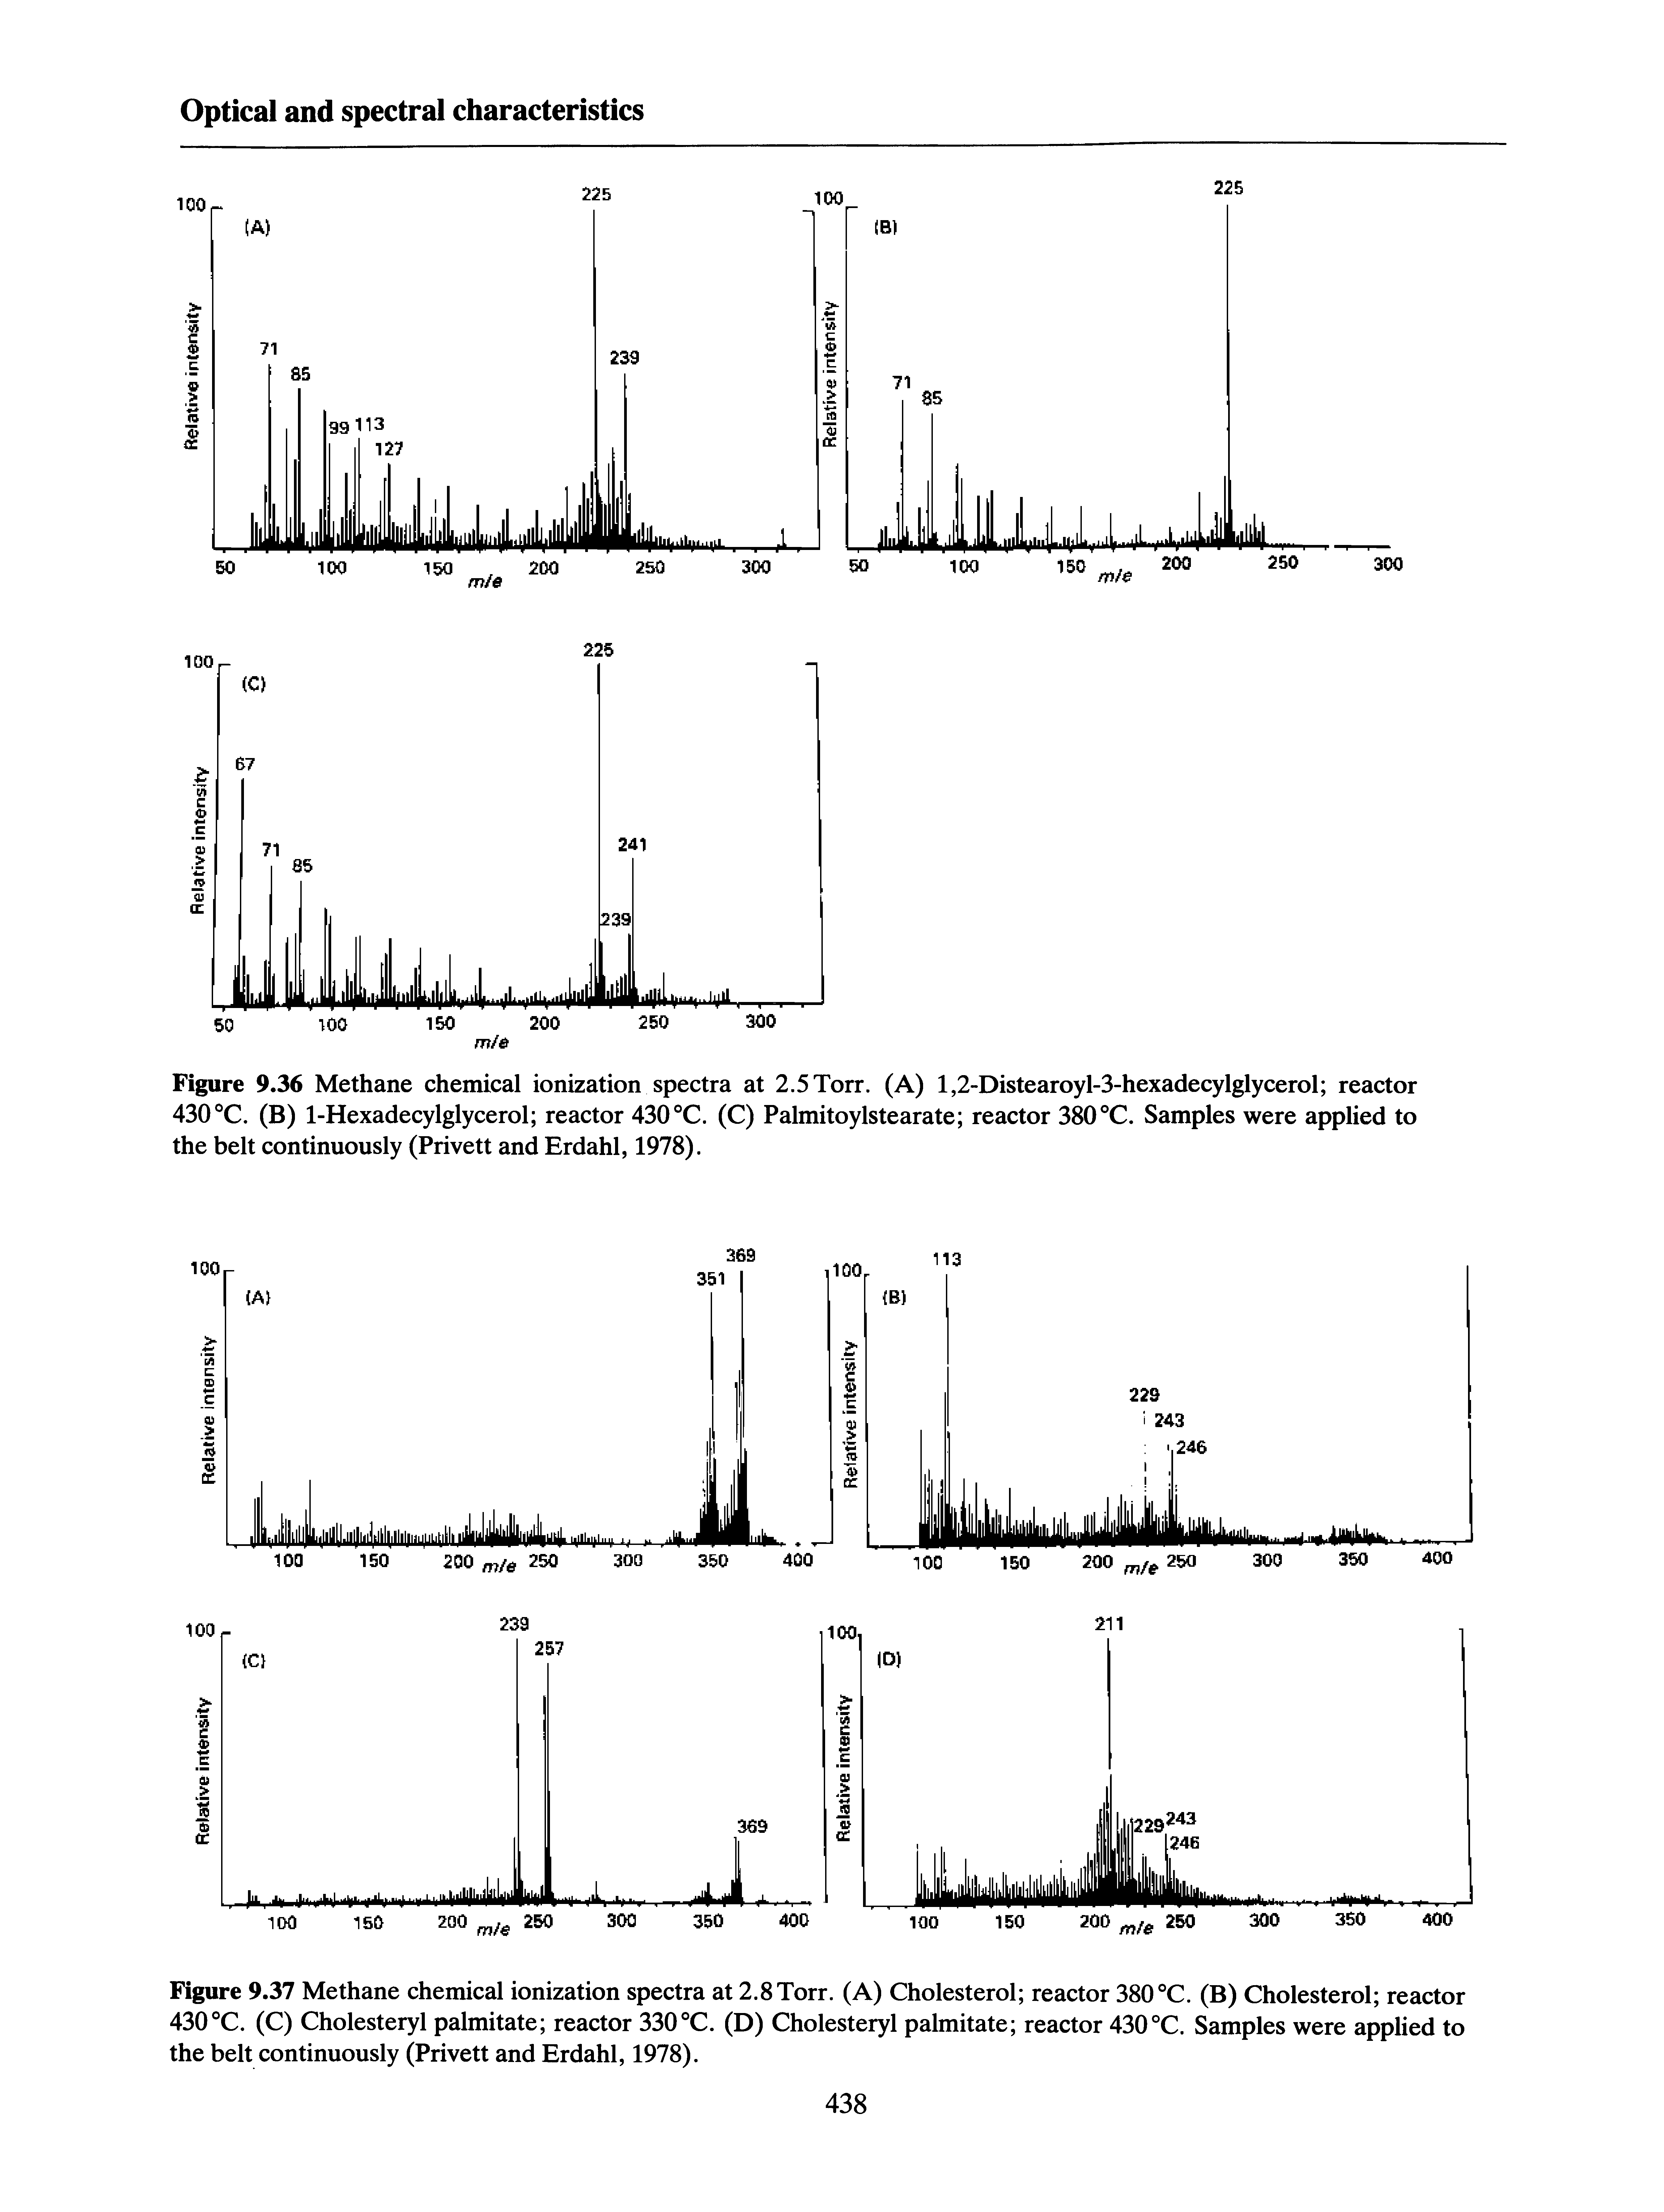 Figure 9.36 Methane chemical ionization spectra at 2.5Torr. (A) l,2-Distearoyl-3-hexadecylglycerol reactor 430°C. (B) 1-Hexadecylglycerol reactor 430°C. (C) Palmitoylstearate reactor 380°C. Samples were applied to the belt continuously (Privett and Erdahl, 1978).